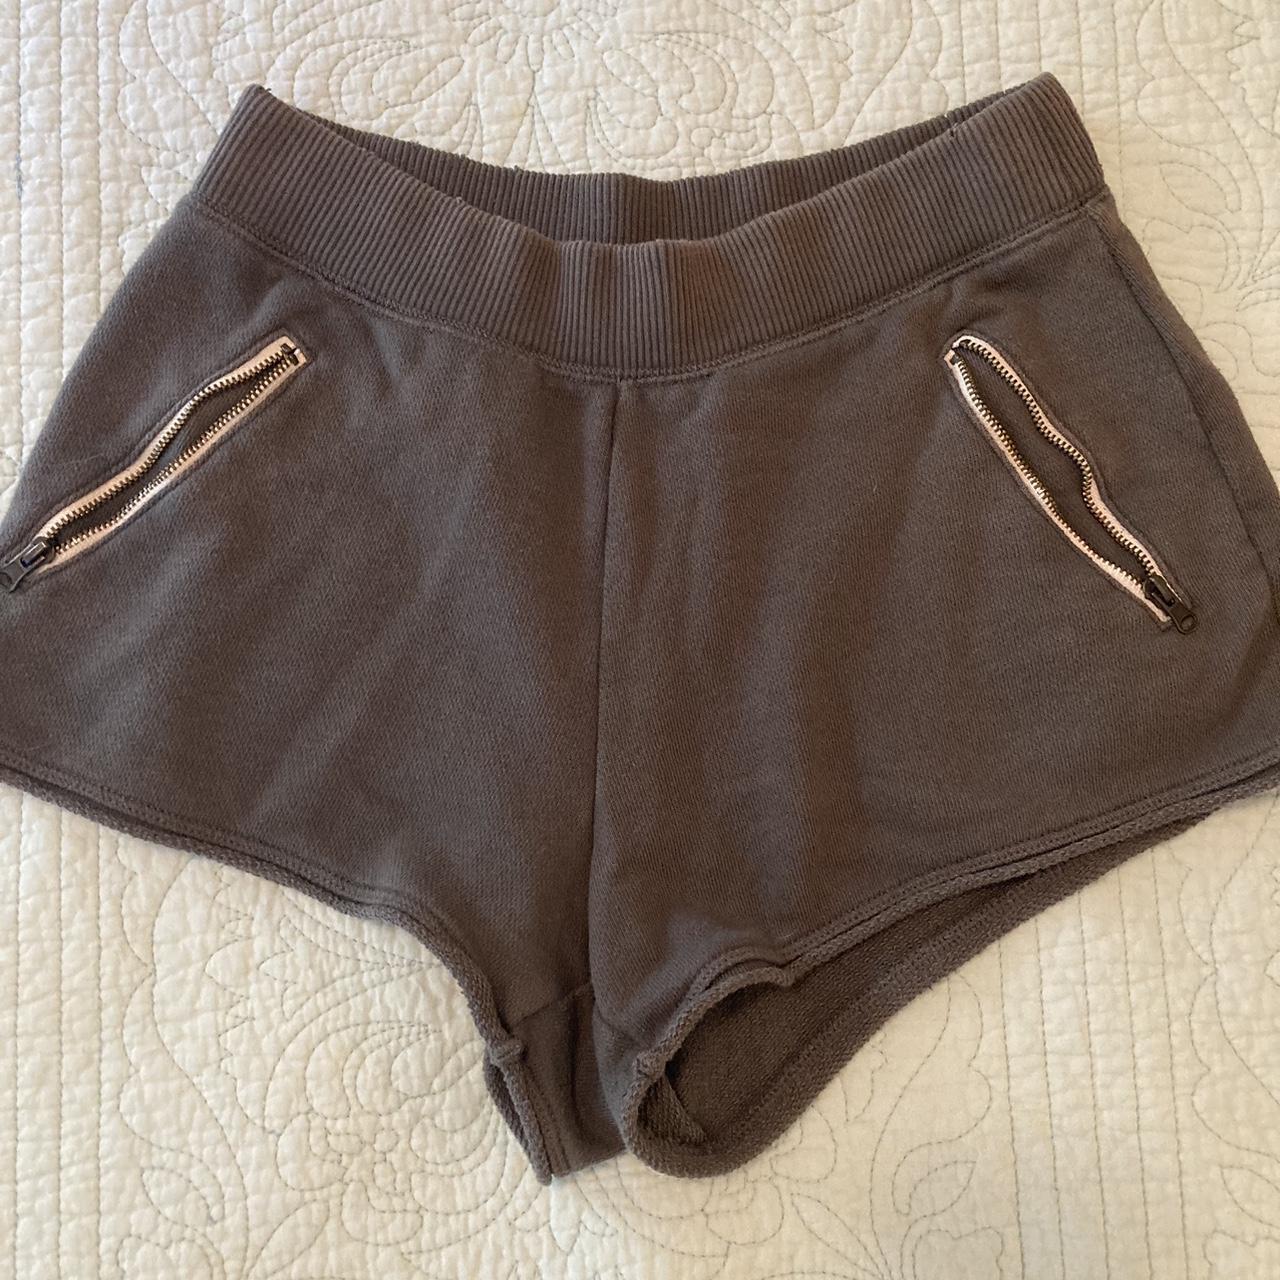 American Eagle dark gray sweat shorts Size small and... - Depop